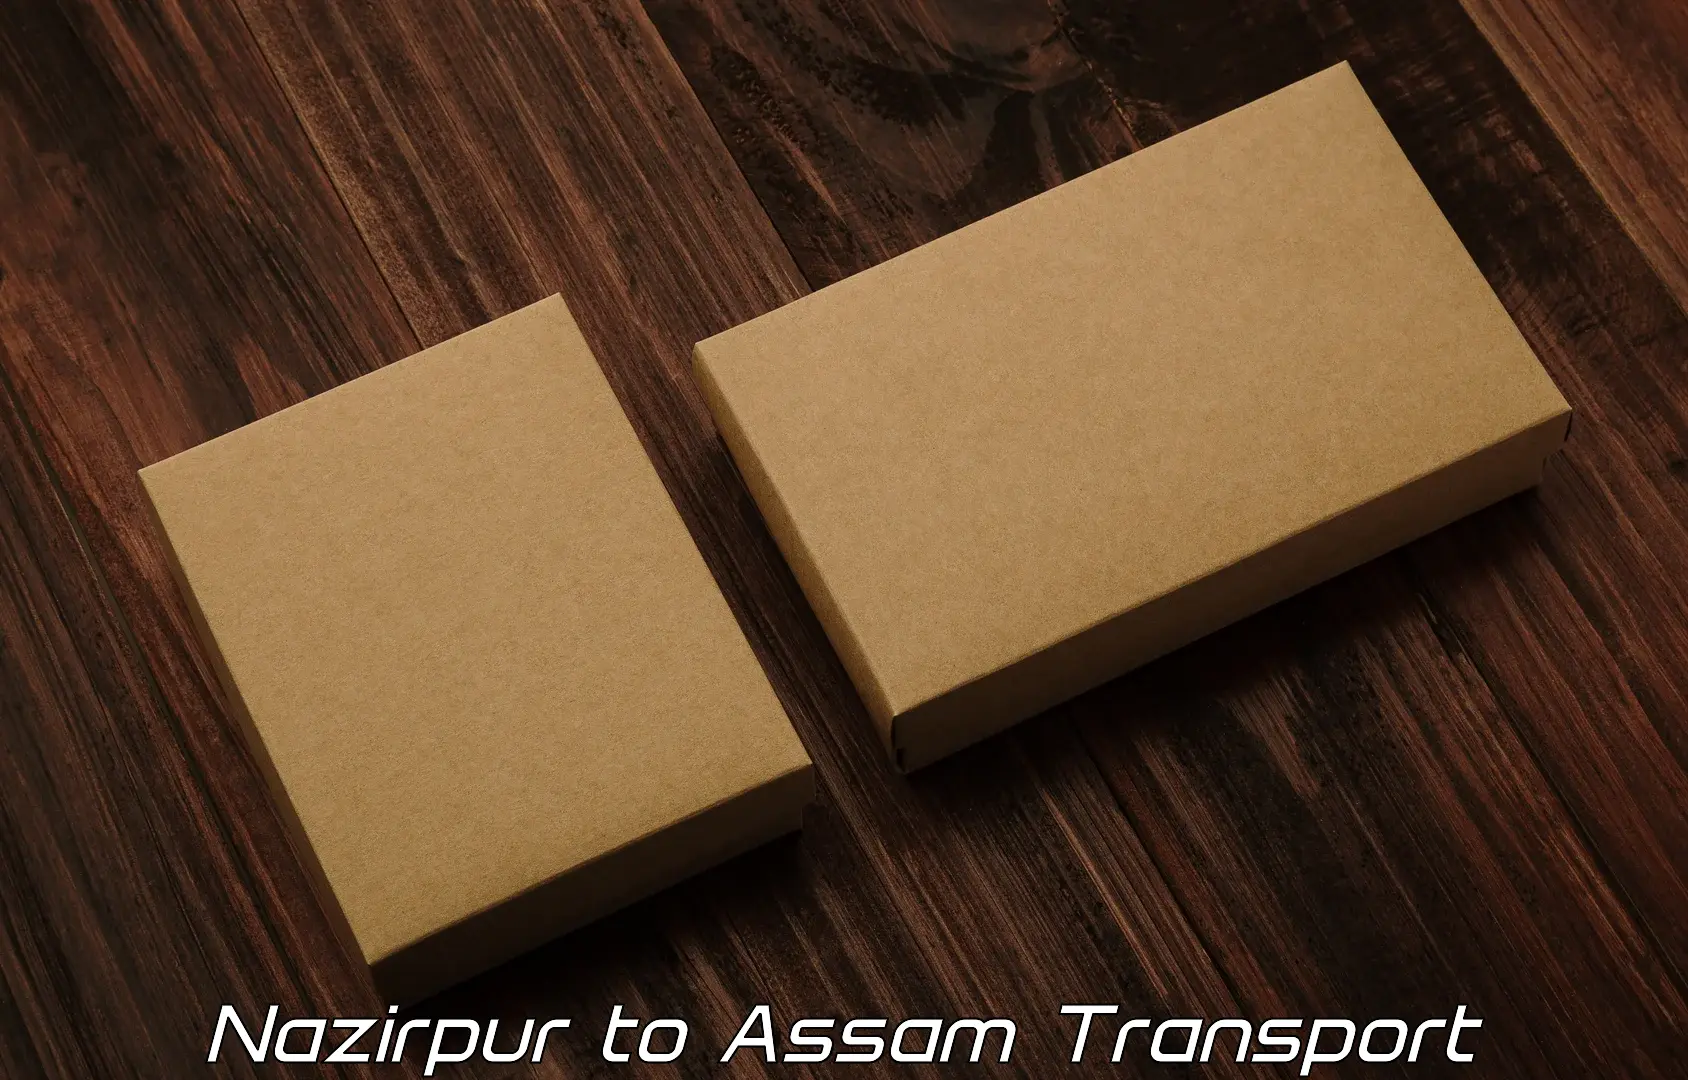 Pick up transport service in Nazirpur to Lala Assam